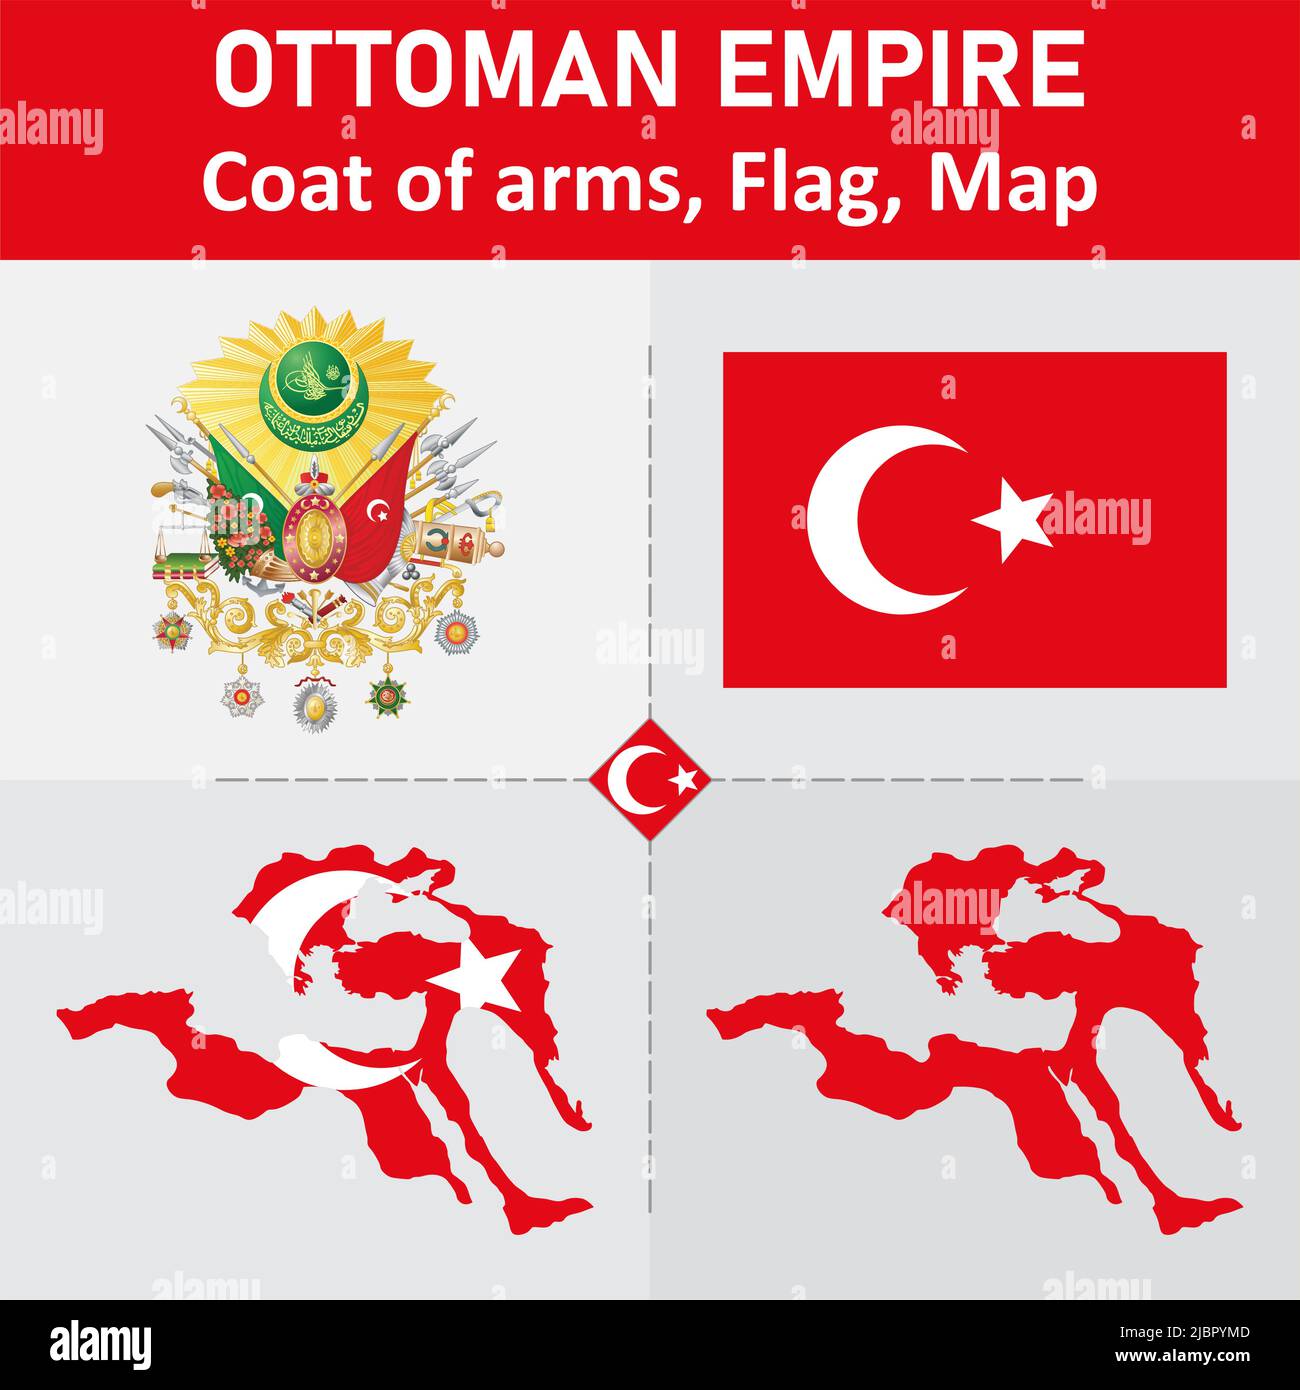 Ottoman Empire Coat of Arms, Flag and Map Stock Vector